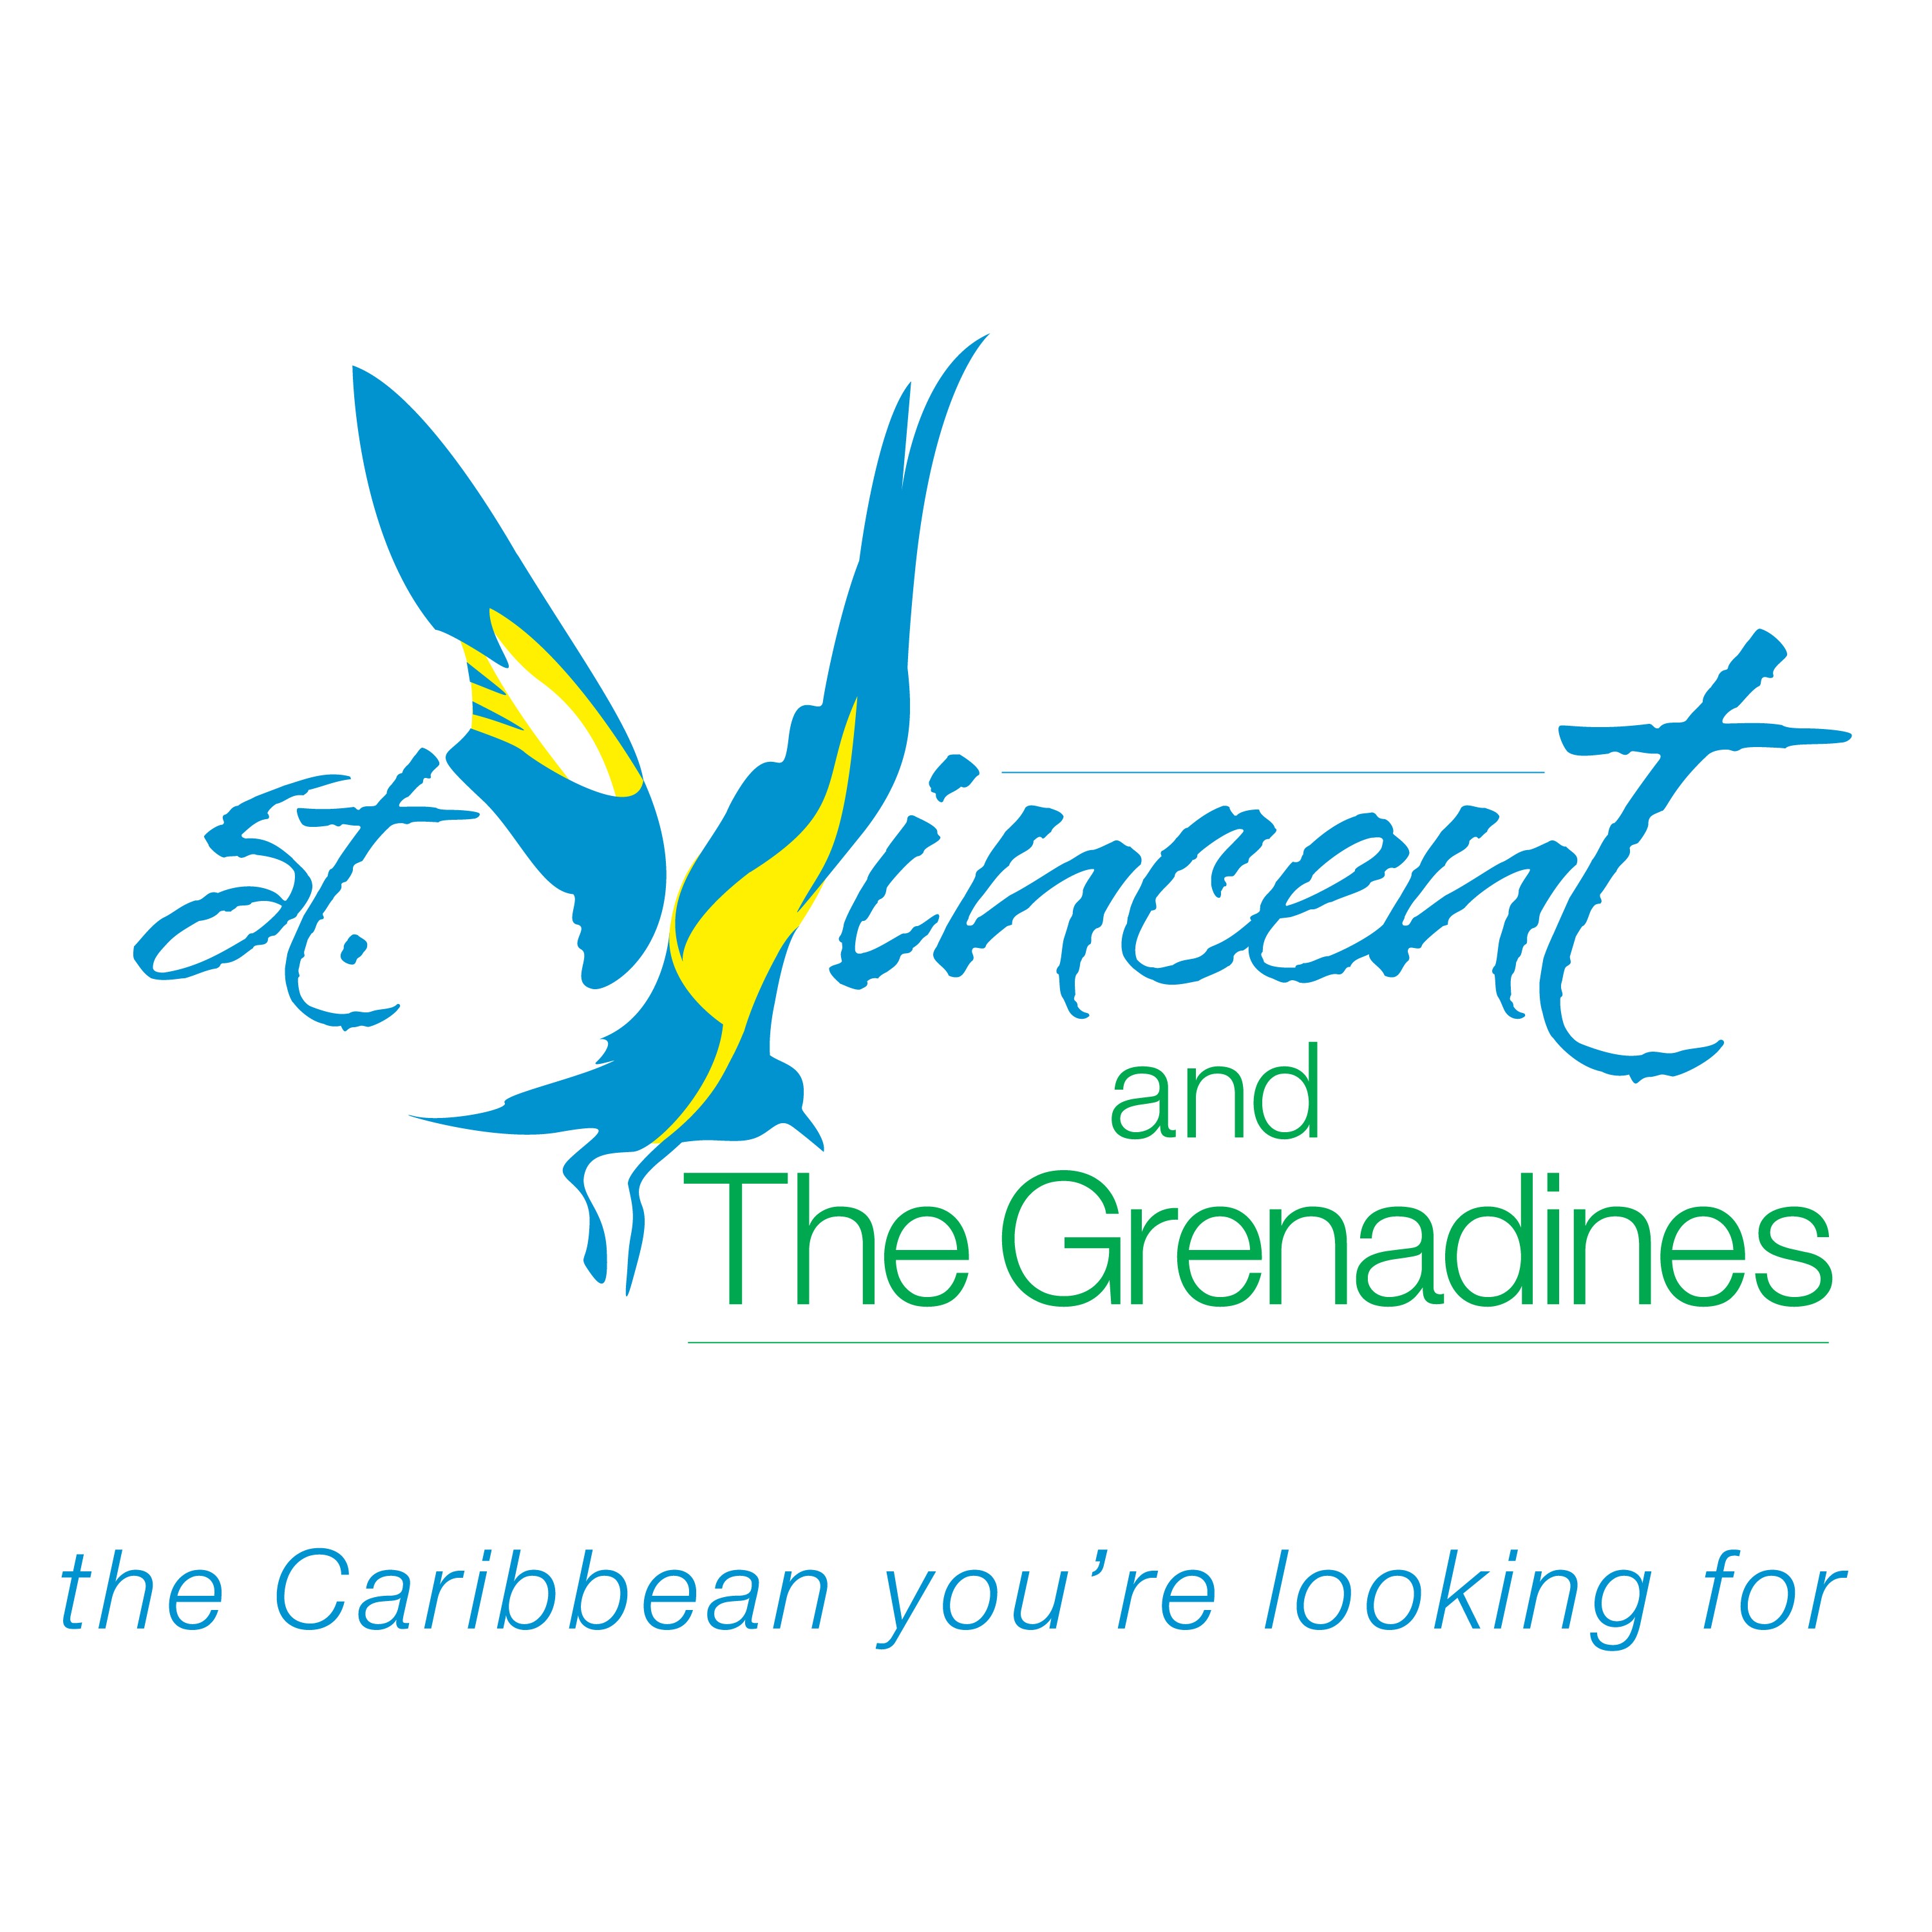 St Vinent and The Grenadines Tourist Office